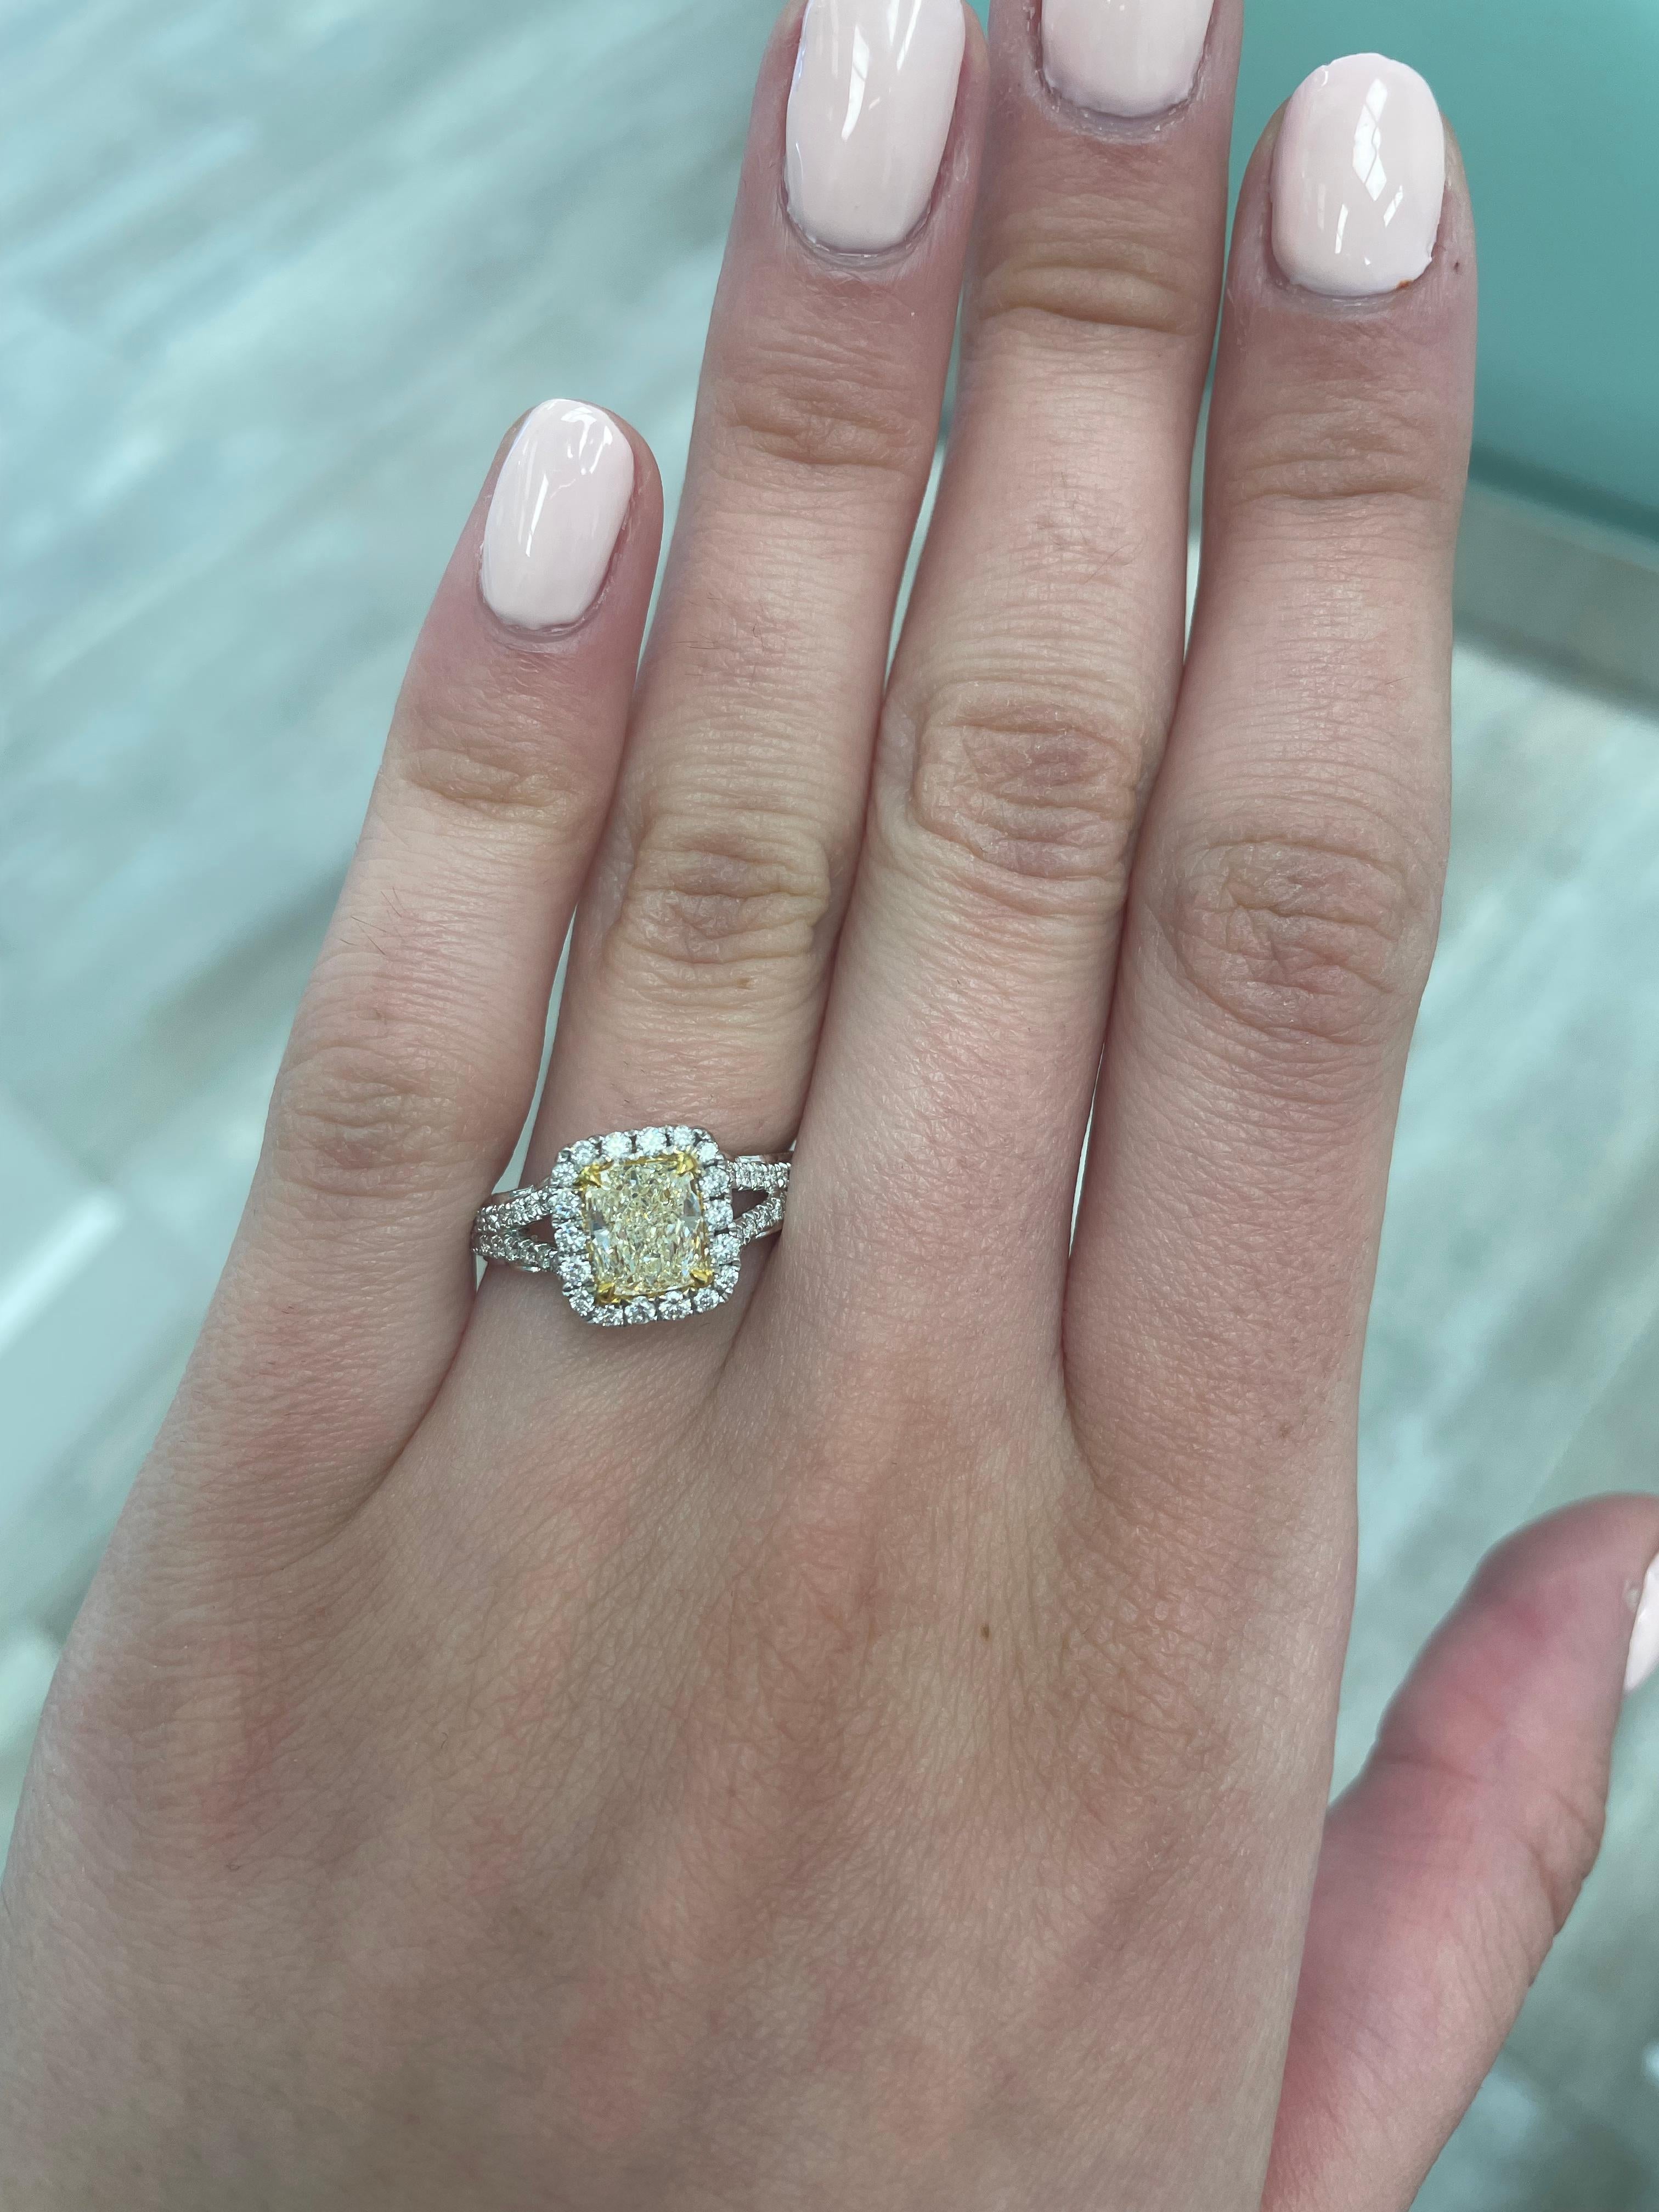 Stunning modern EGL certified yellow diamond with halo ring, two-tone 18k yellow and white gold, split shank. By Alexander Beverly Hills
1.61 carats total diamond weight.
1.15 carat cushion cut Fancy Light Yellow color and SI1 clarity diamond, EGL